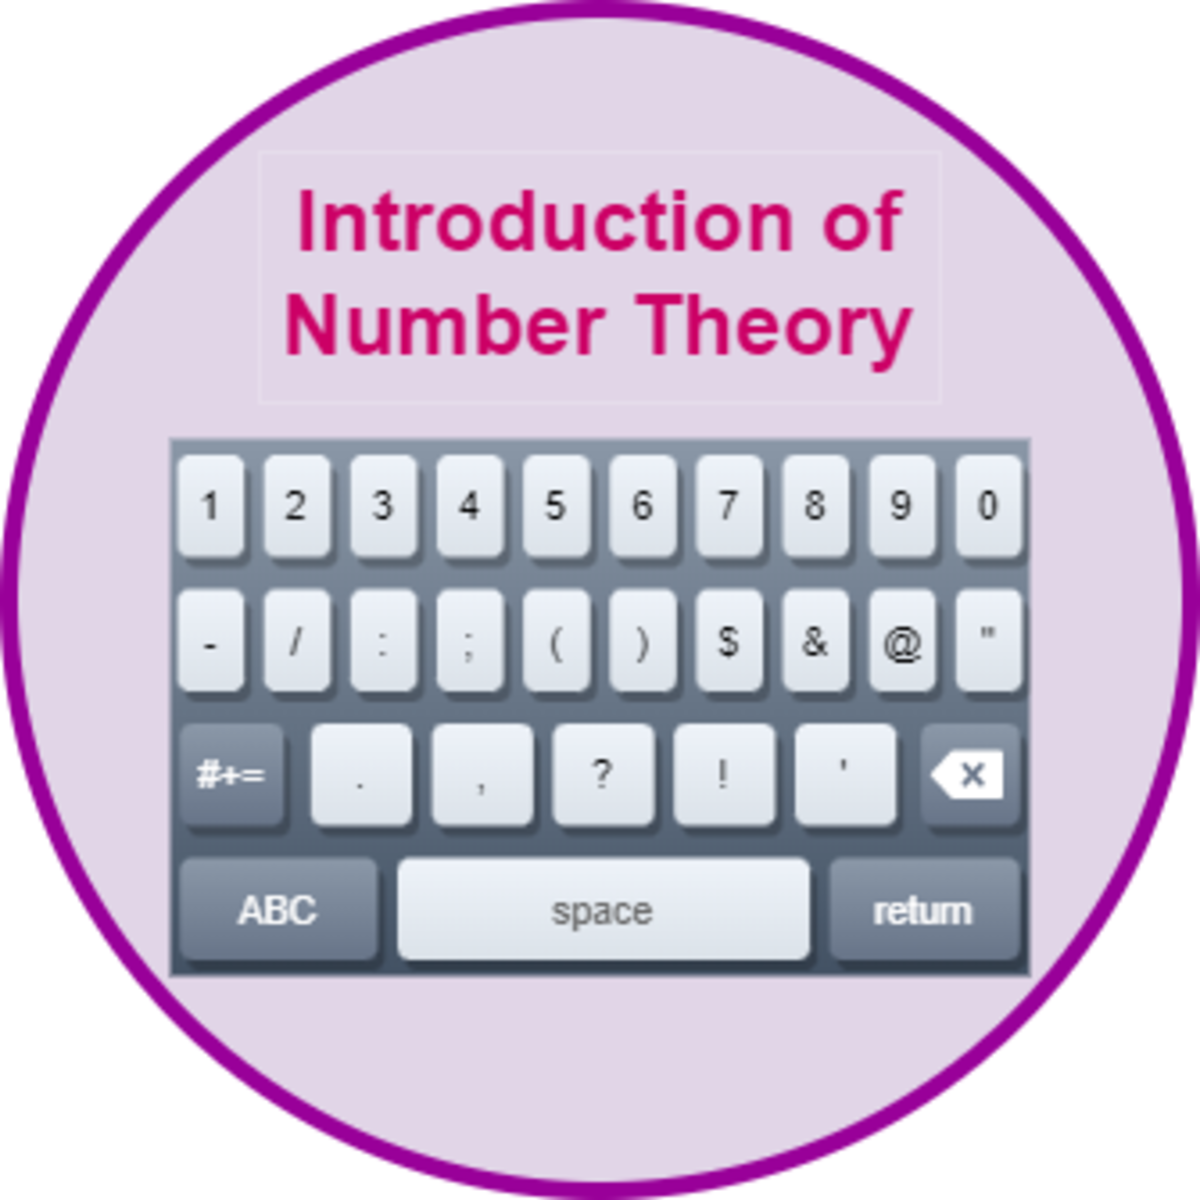 Introduction of Number Theory in Mathematics